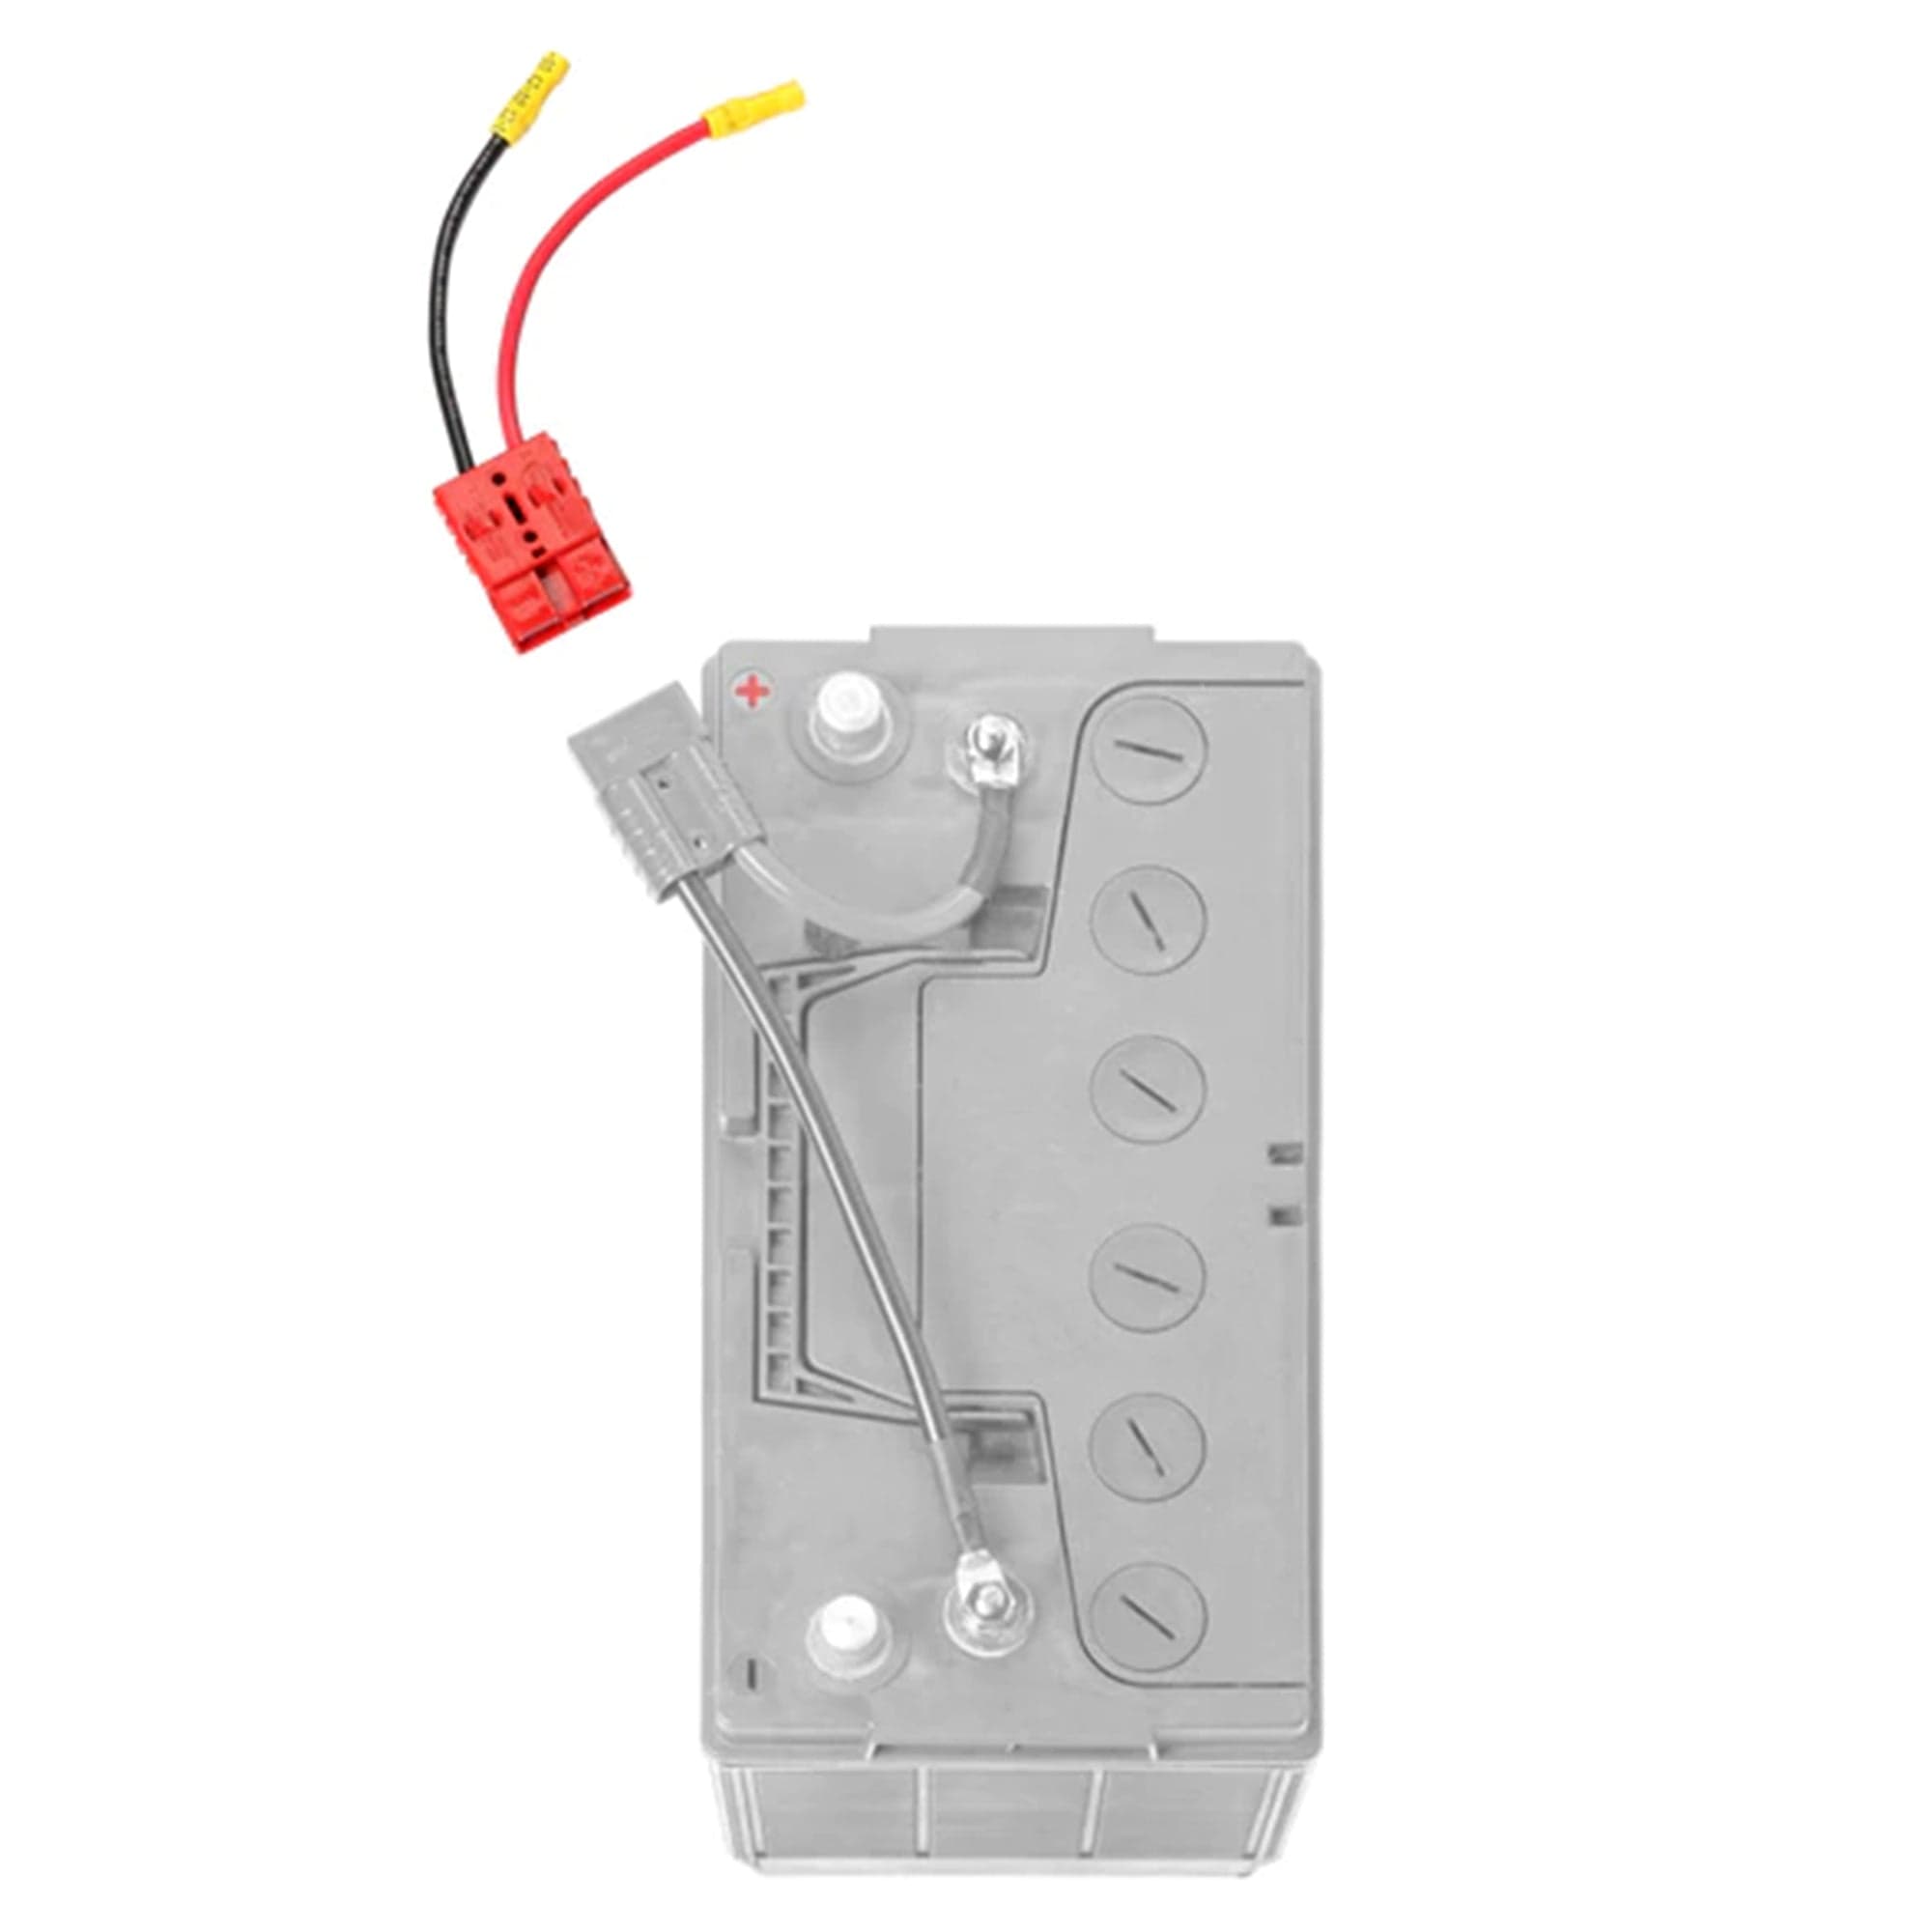 Connect-Ease: 12 Volt Easy Battery Connector – Connect-Ease. Get Connected  Connect all your marine equipment with ease.